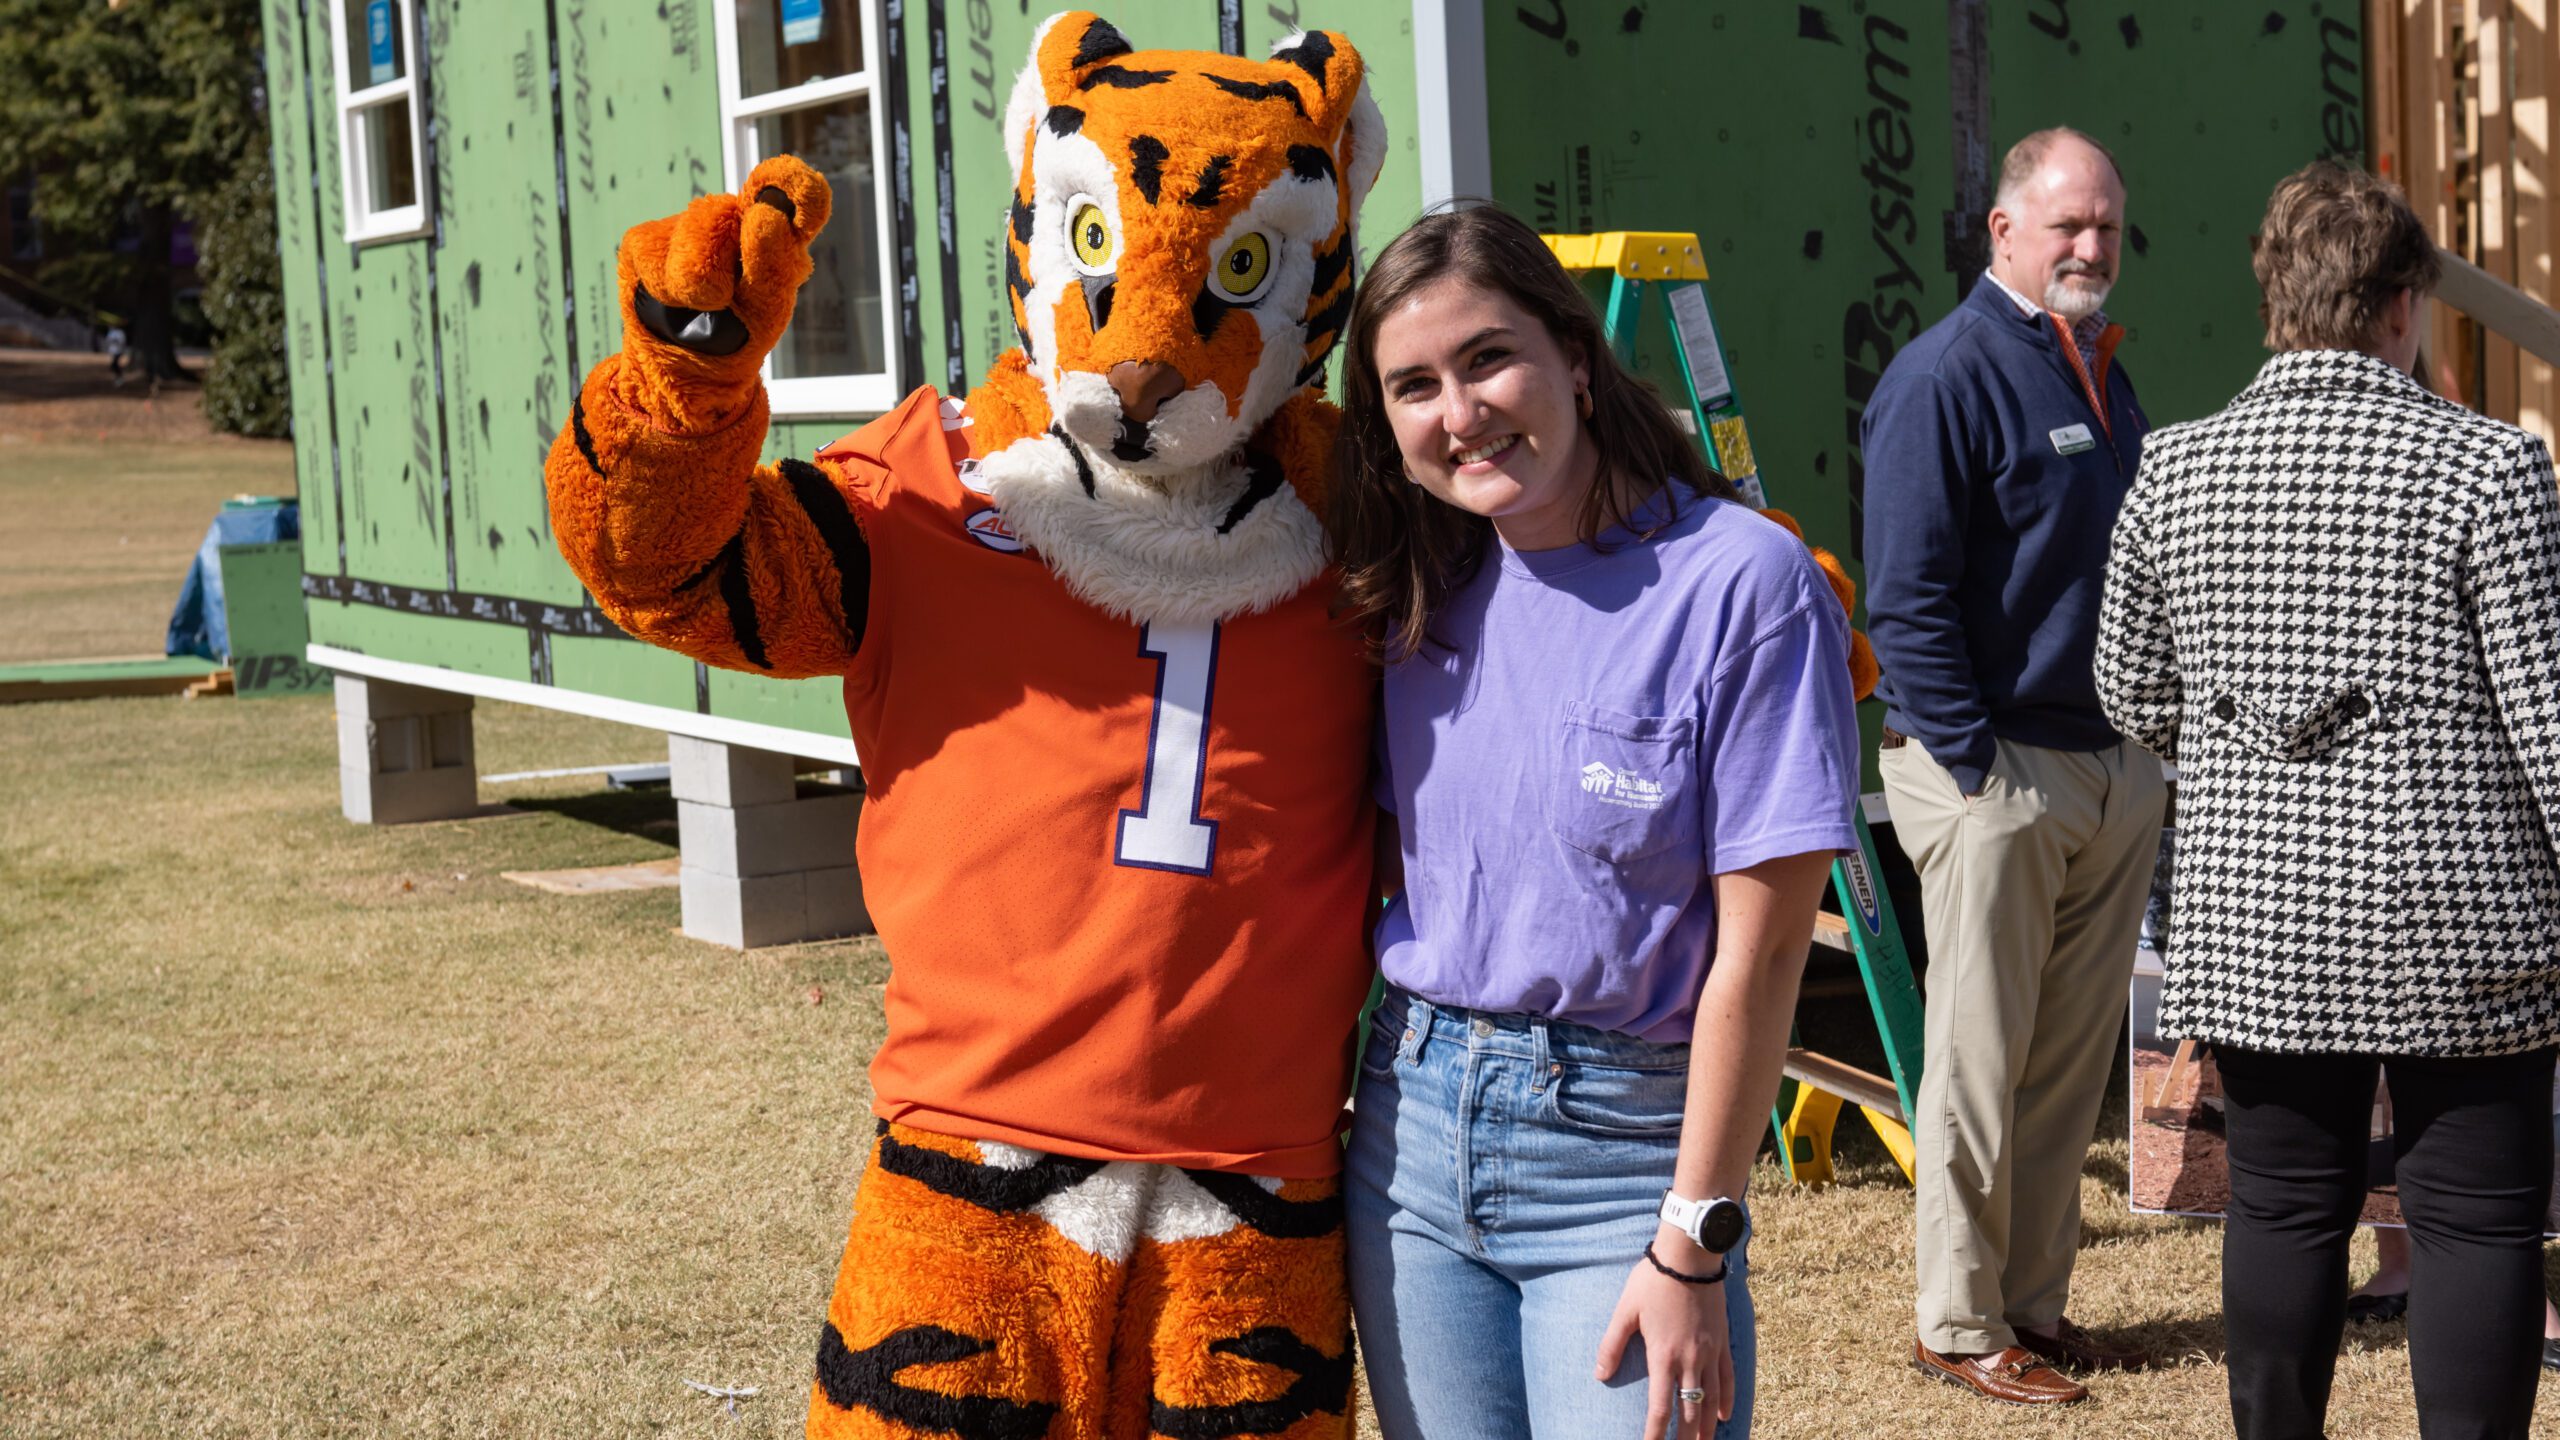 Katherine Harland, chapter president of Habitat for Humanity, pictured with The Tiger mascot